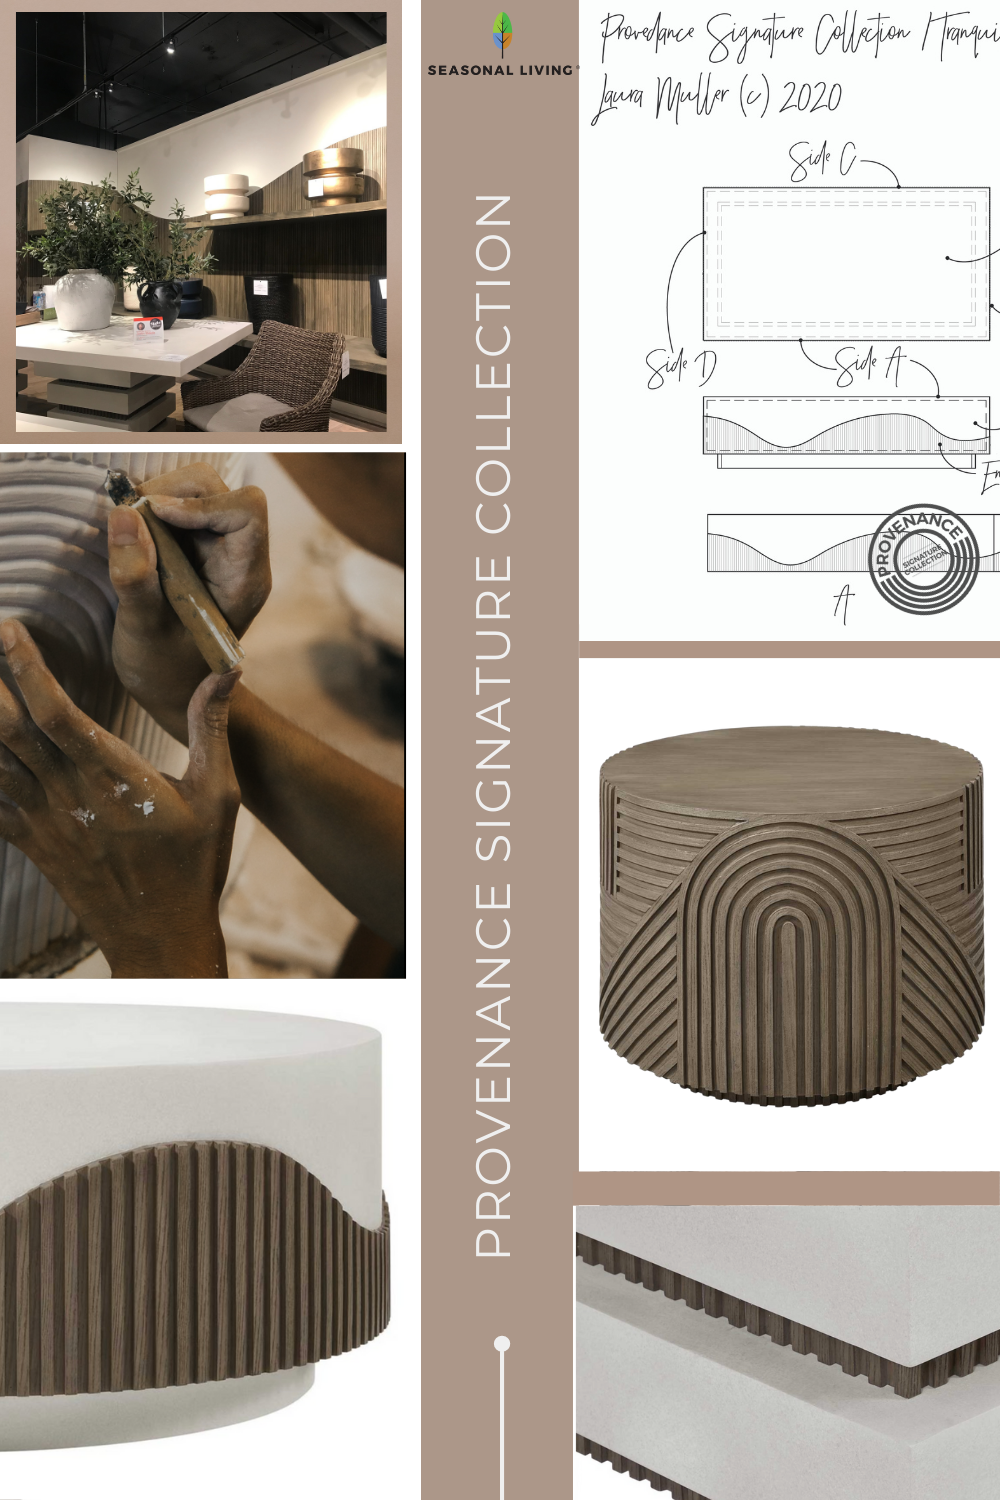 Some of the various pieces from the Provenance Signature Collection for Seasonal Living, designed by Laura Muller. 